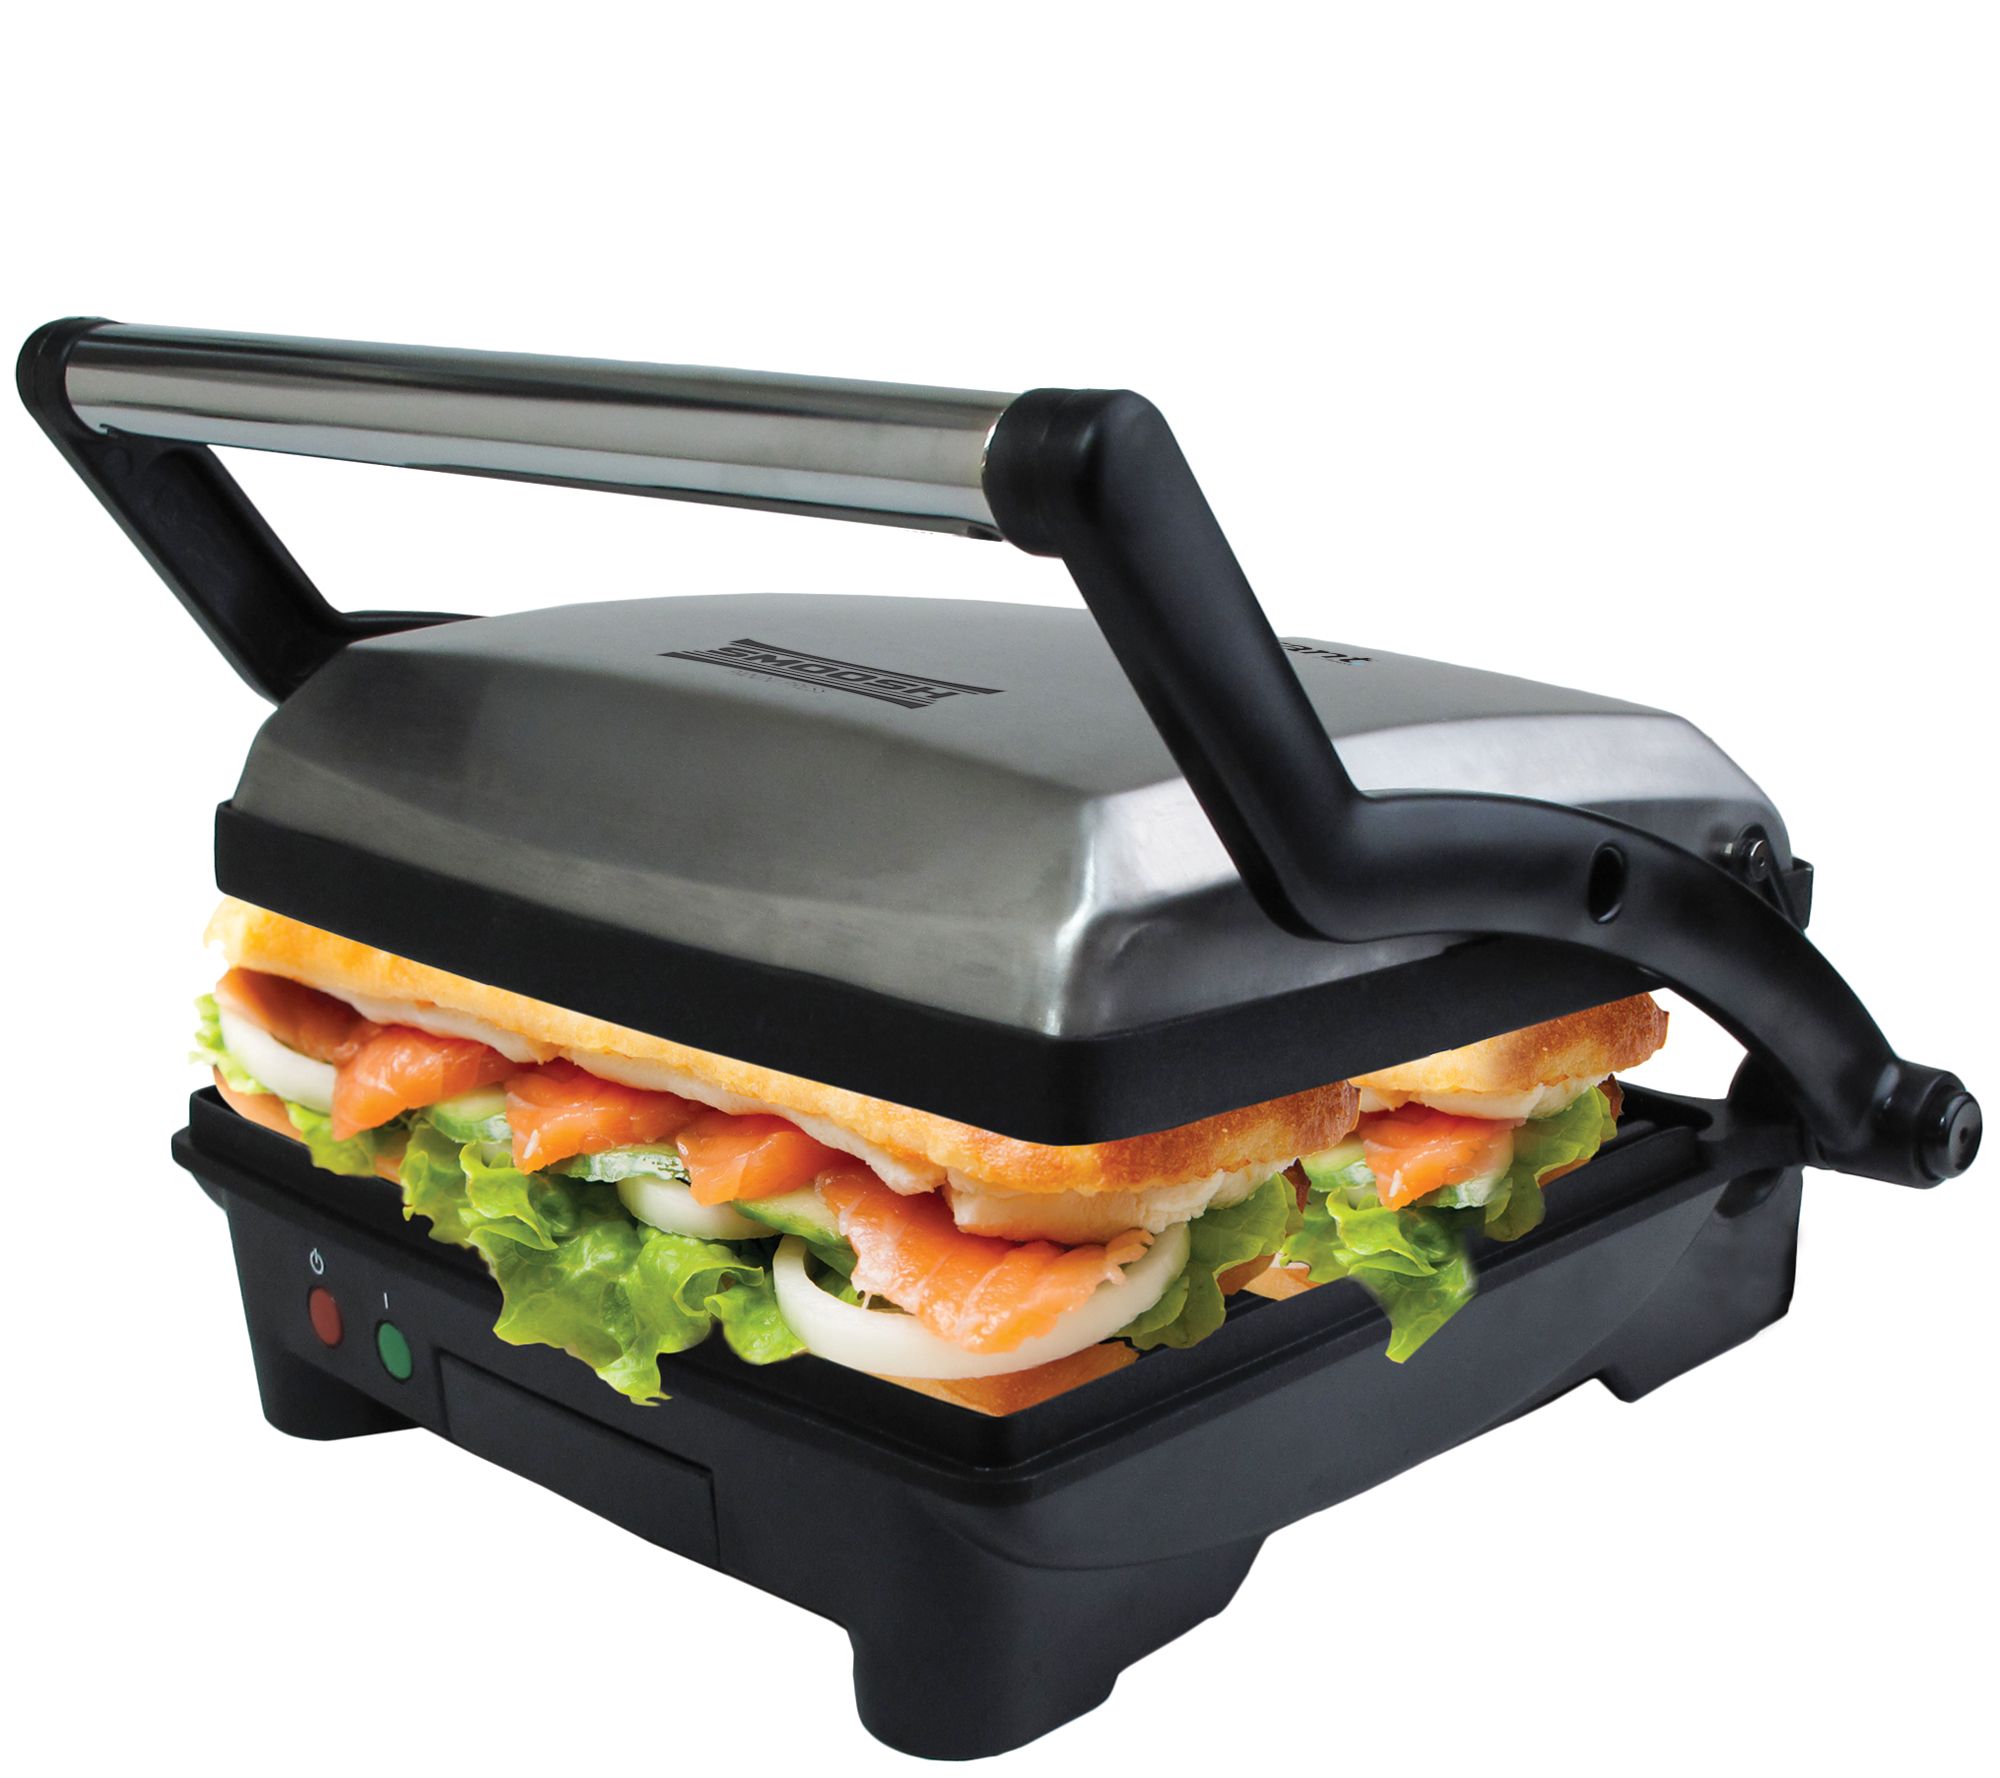 Courant 4-Serving Press and Griddle - QVC.com